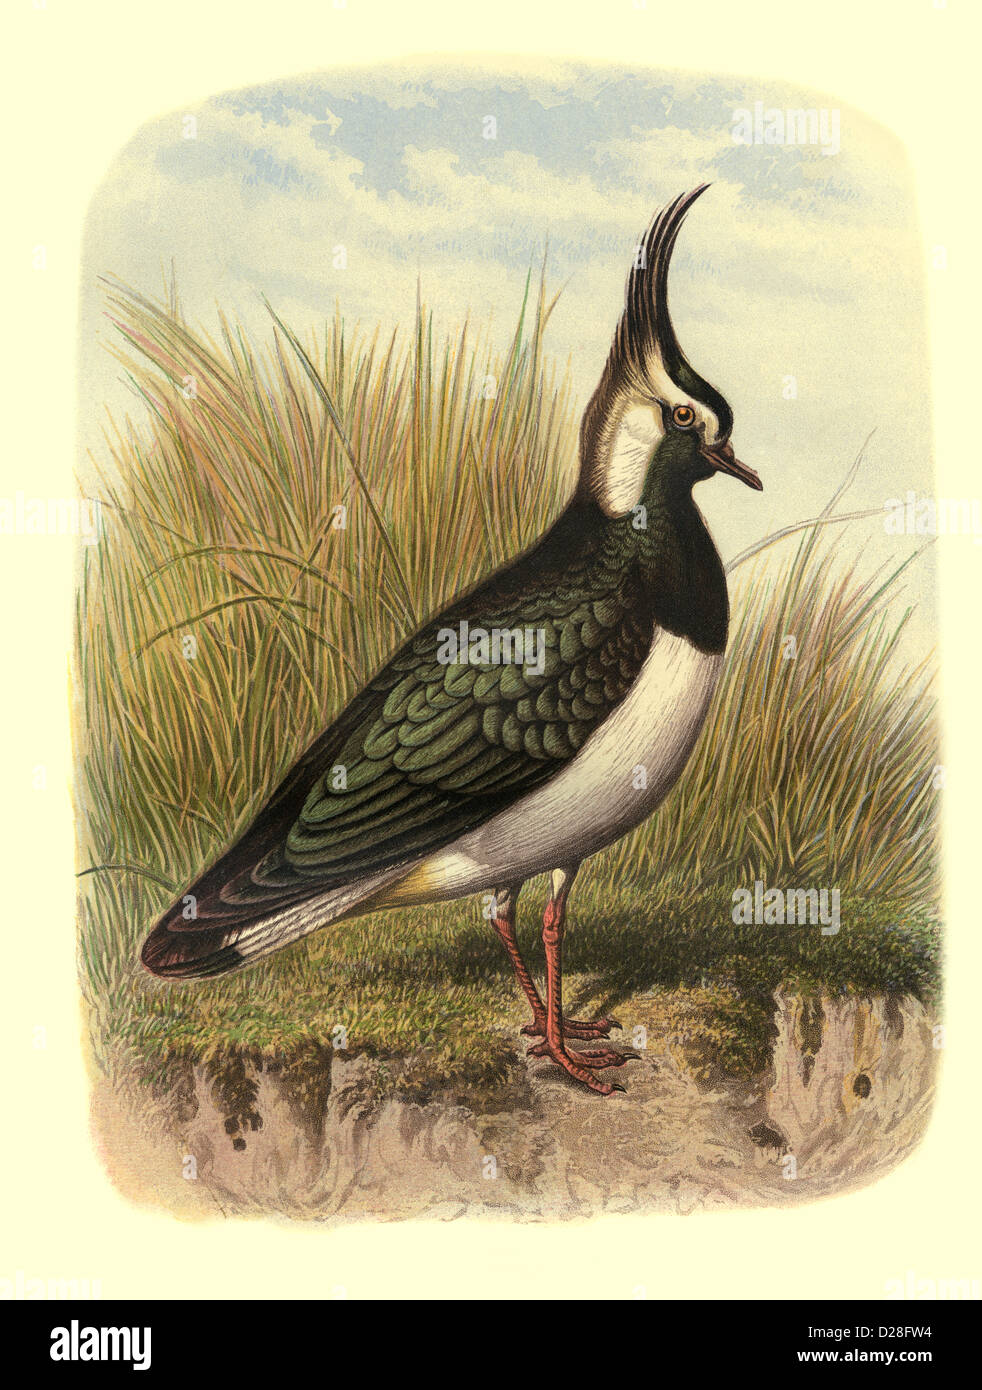 'The Lapwing' Illustration High resolution enhanced scan of antiquarian Victorian colour Lithograph plate 1860's Cassell's Book of Birds 'The Lapwing' Stock Photo